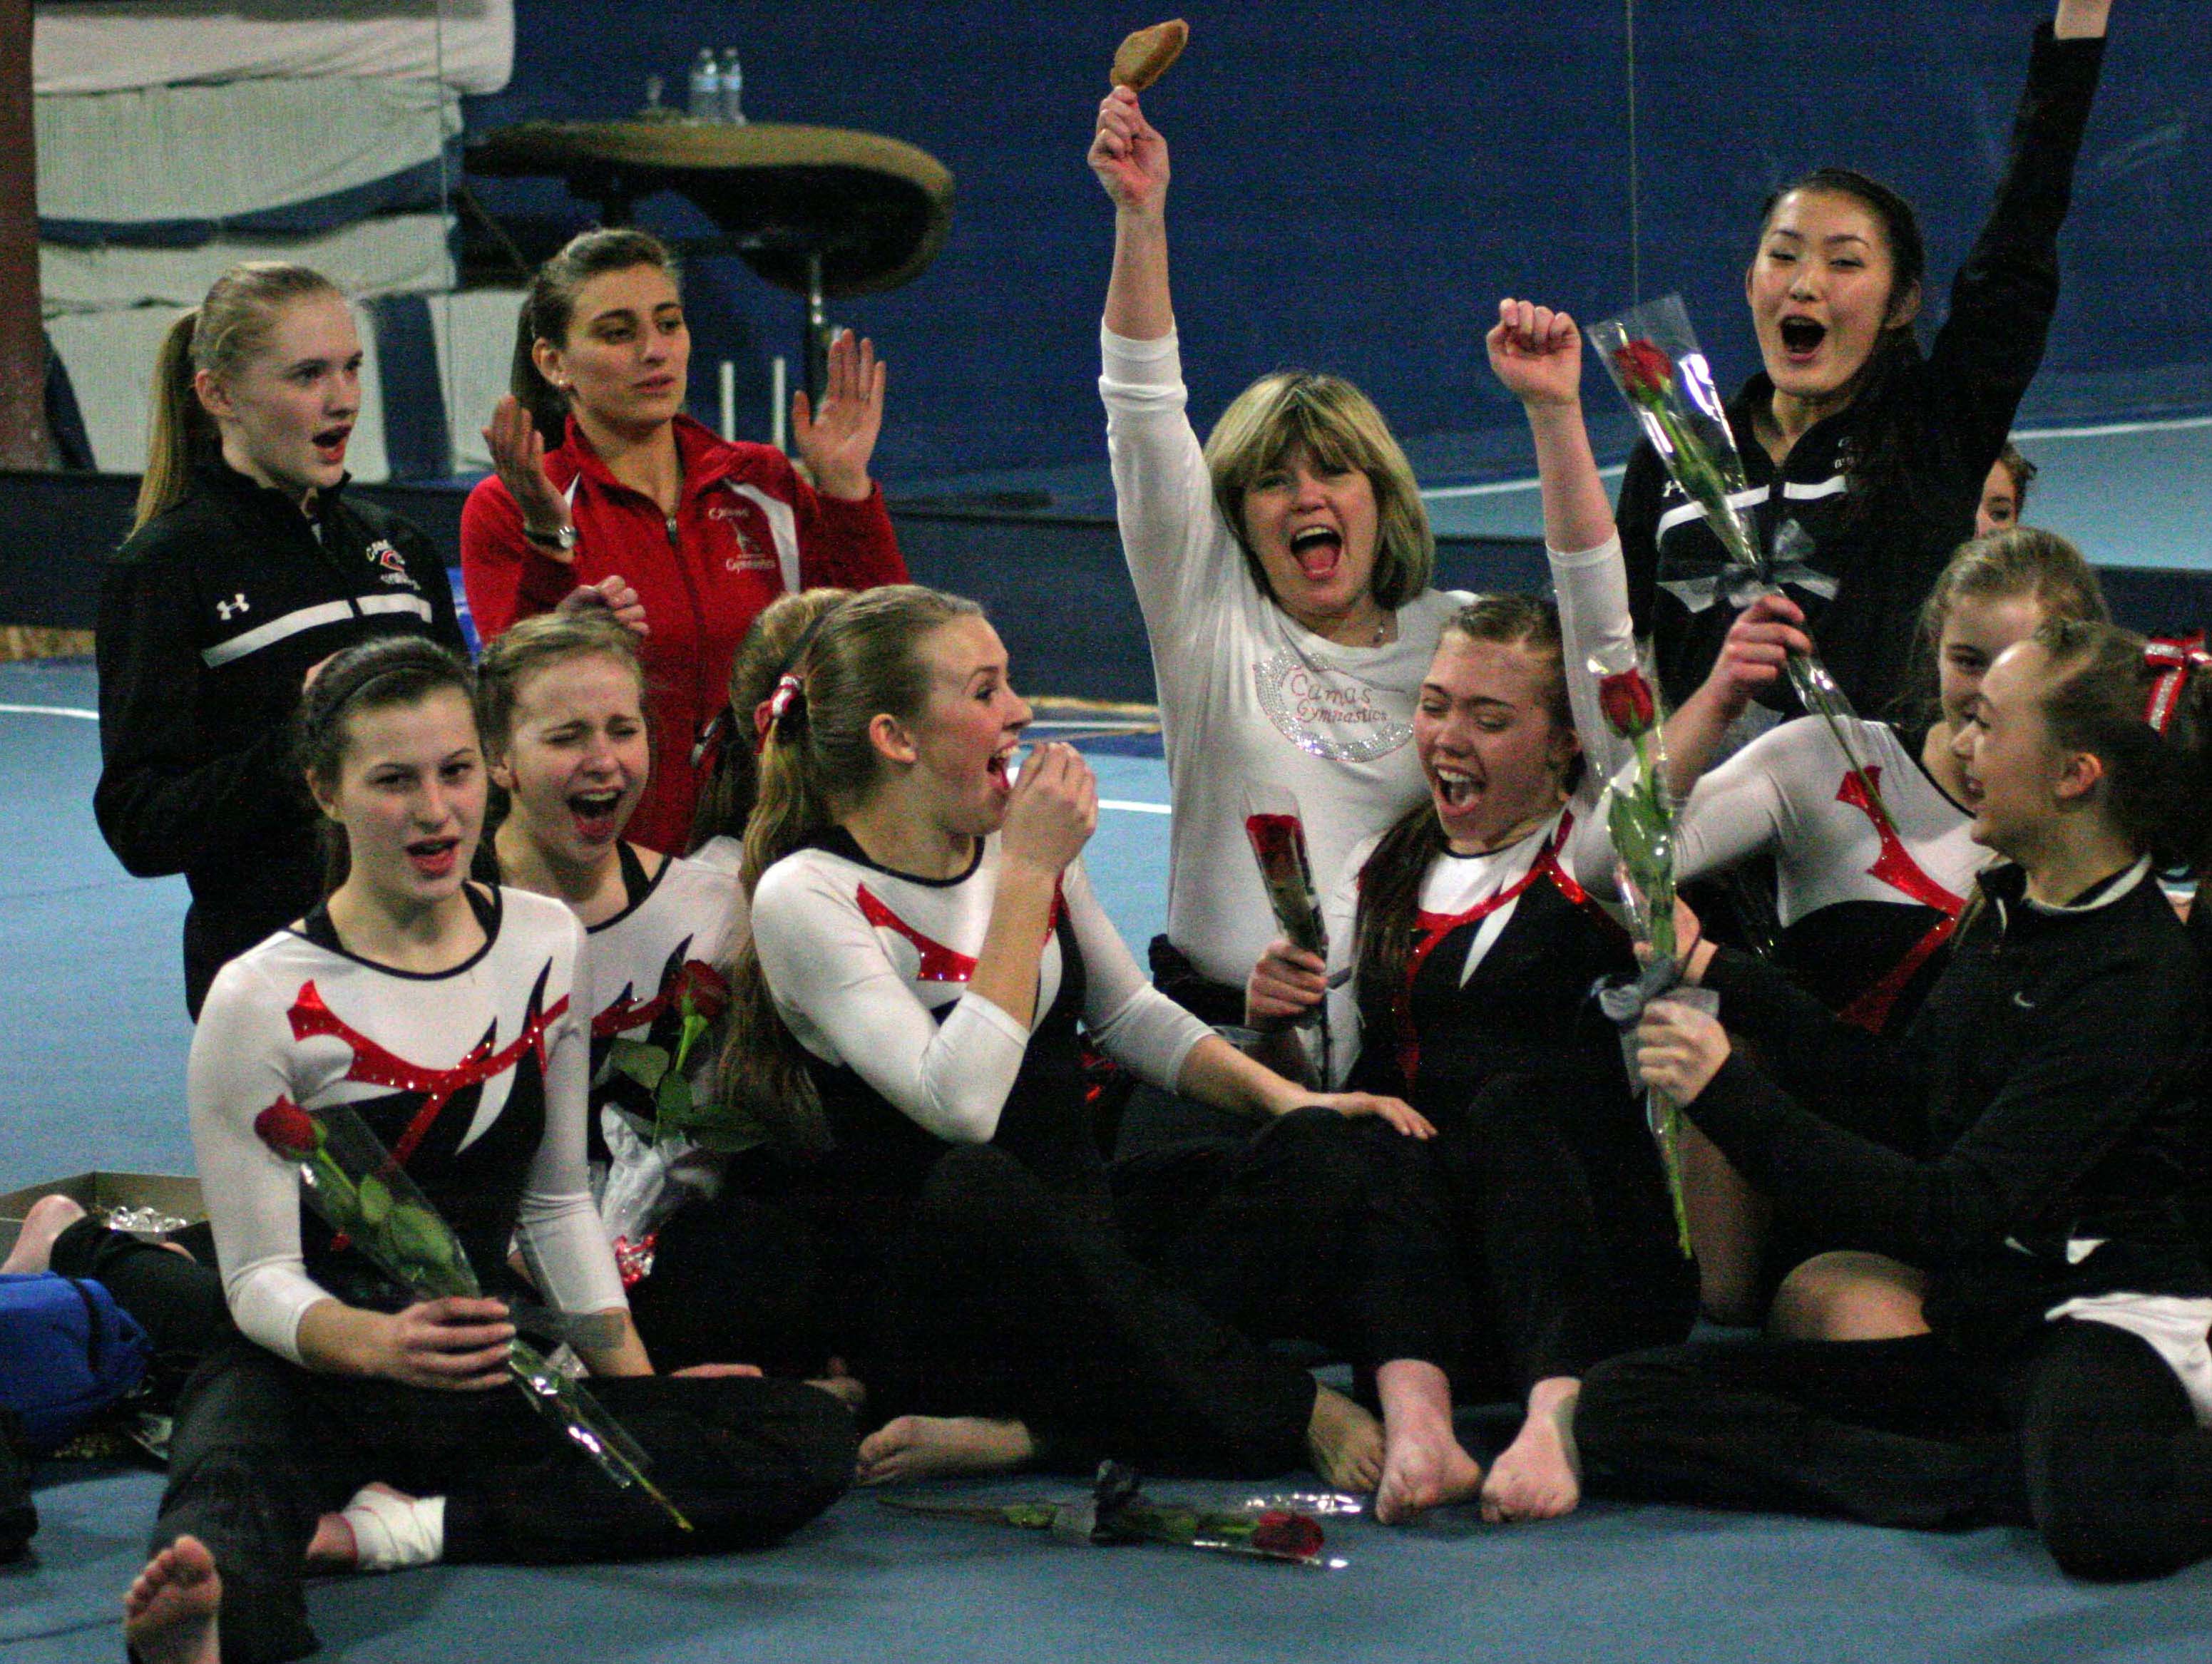 The Camas High School gymnasts celebrate with their coaches after being announced as the district champions, at Northpointe in Vancouver.